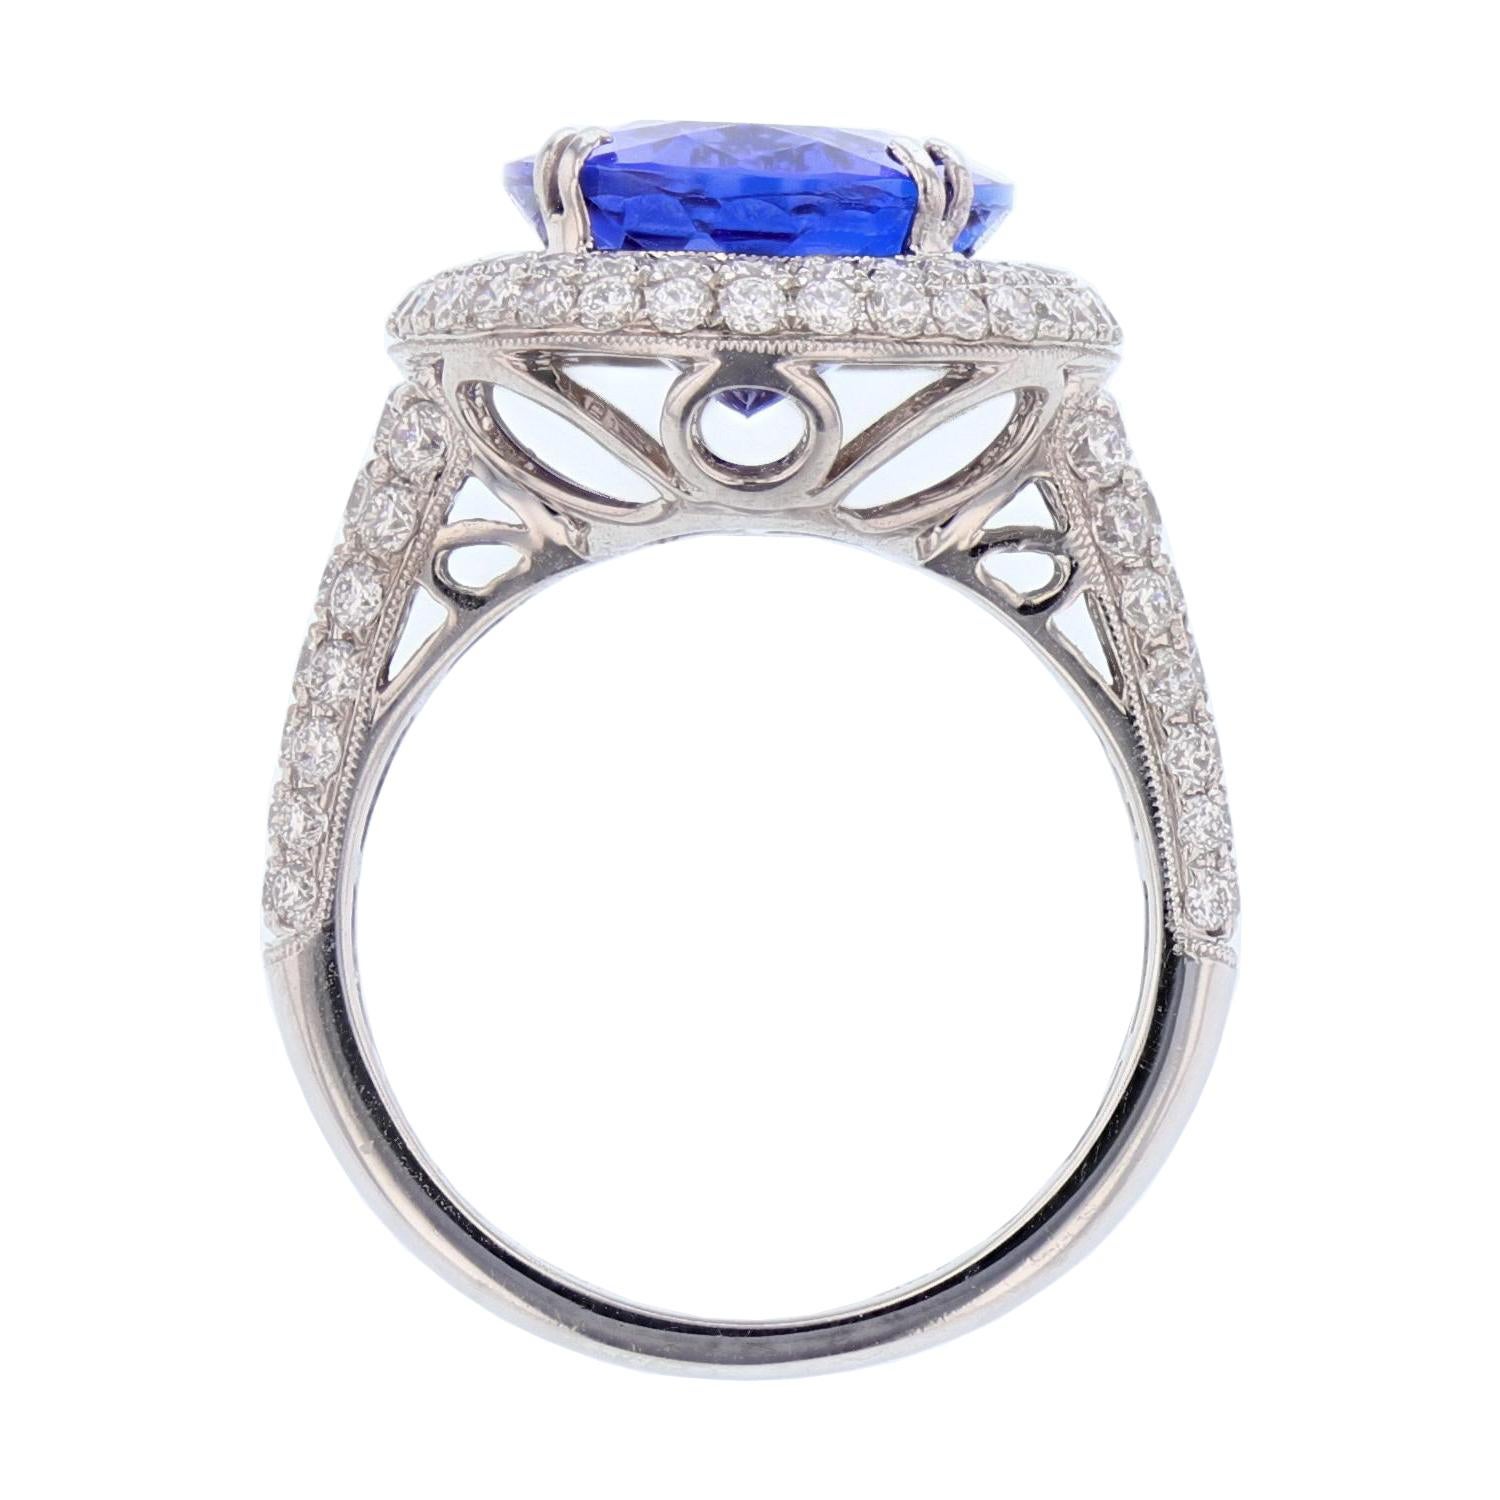 Contemporary 18 Karat White Gold 7.62 Carat Oval Tanzanite and Diamond Ring For Sale